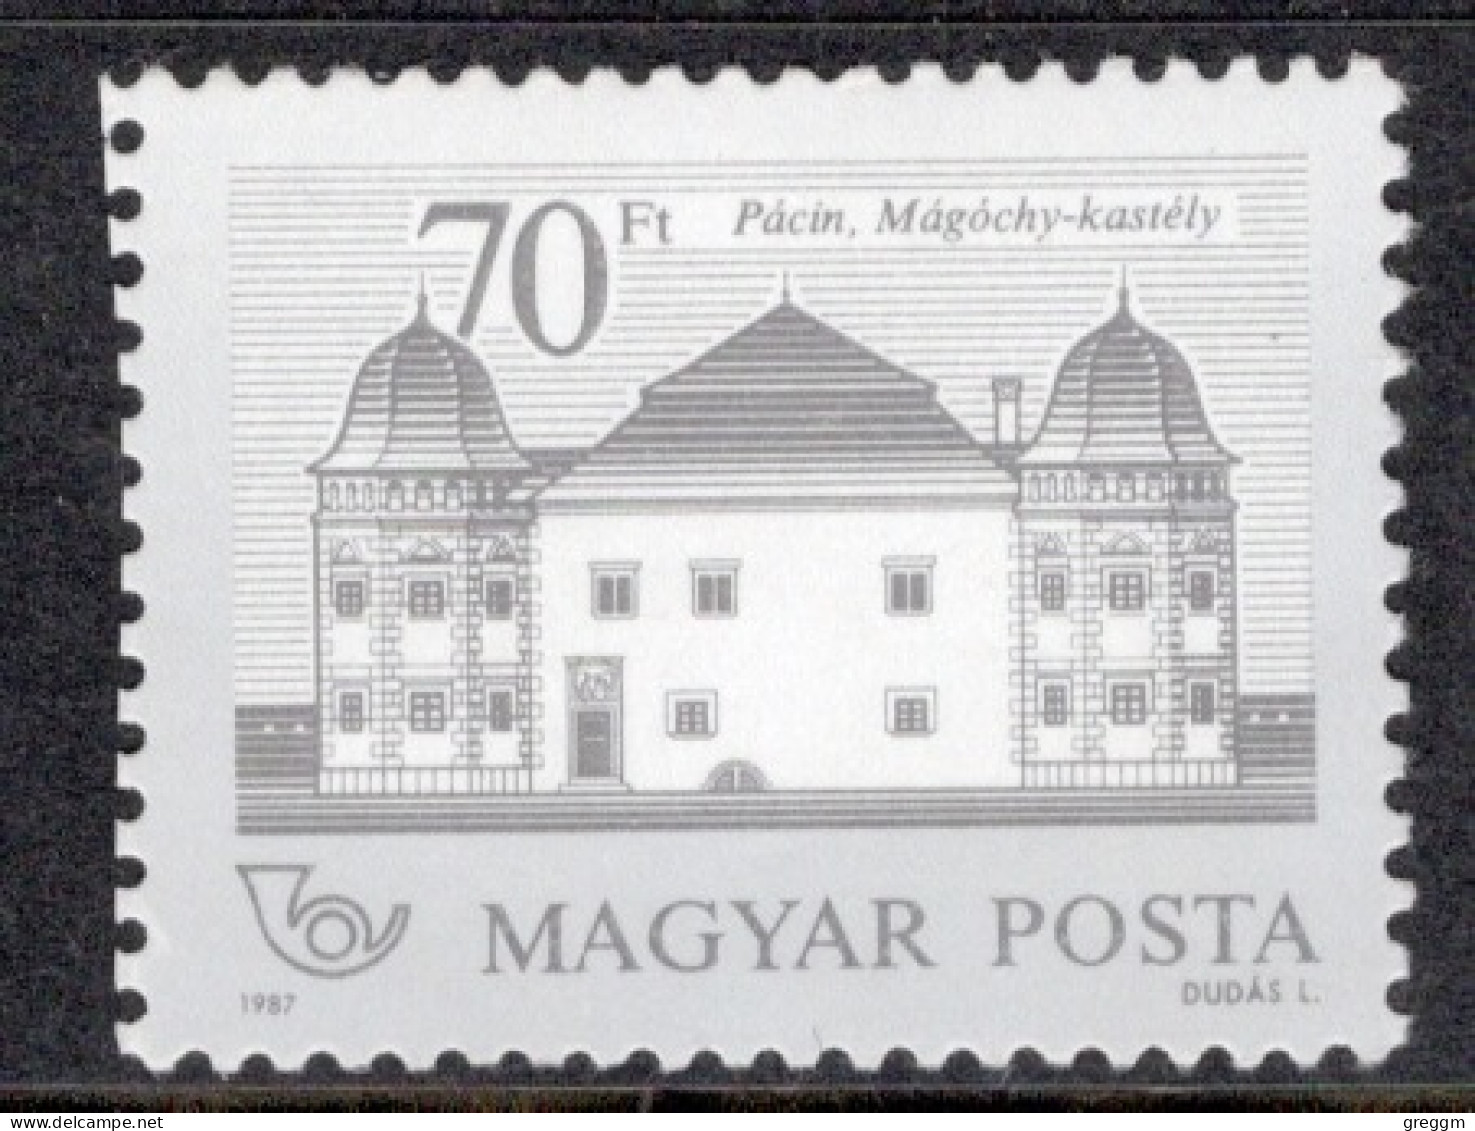 Hungary 1987  Single Stamp Celebrating Castles In Fine Used - Gebraucht